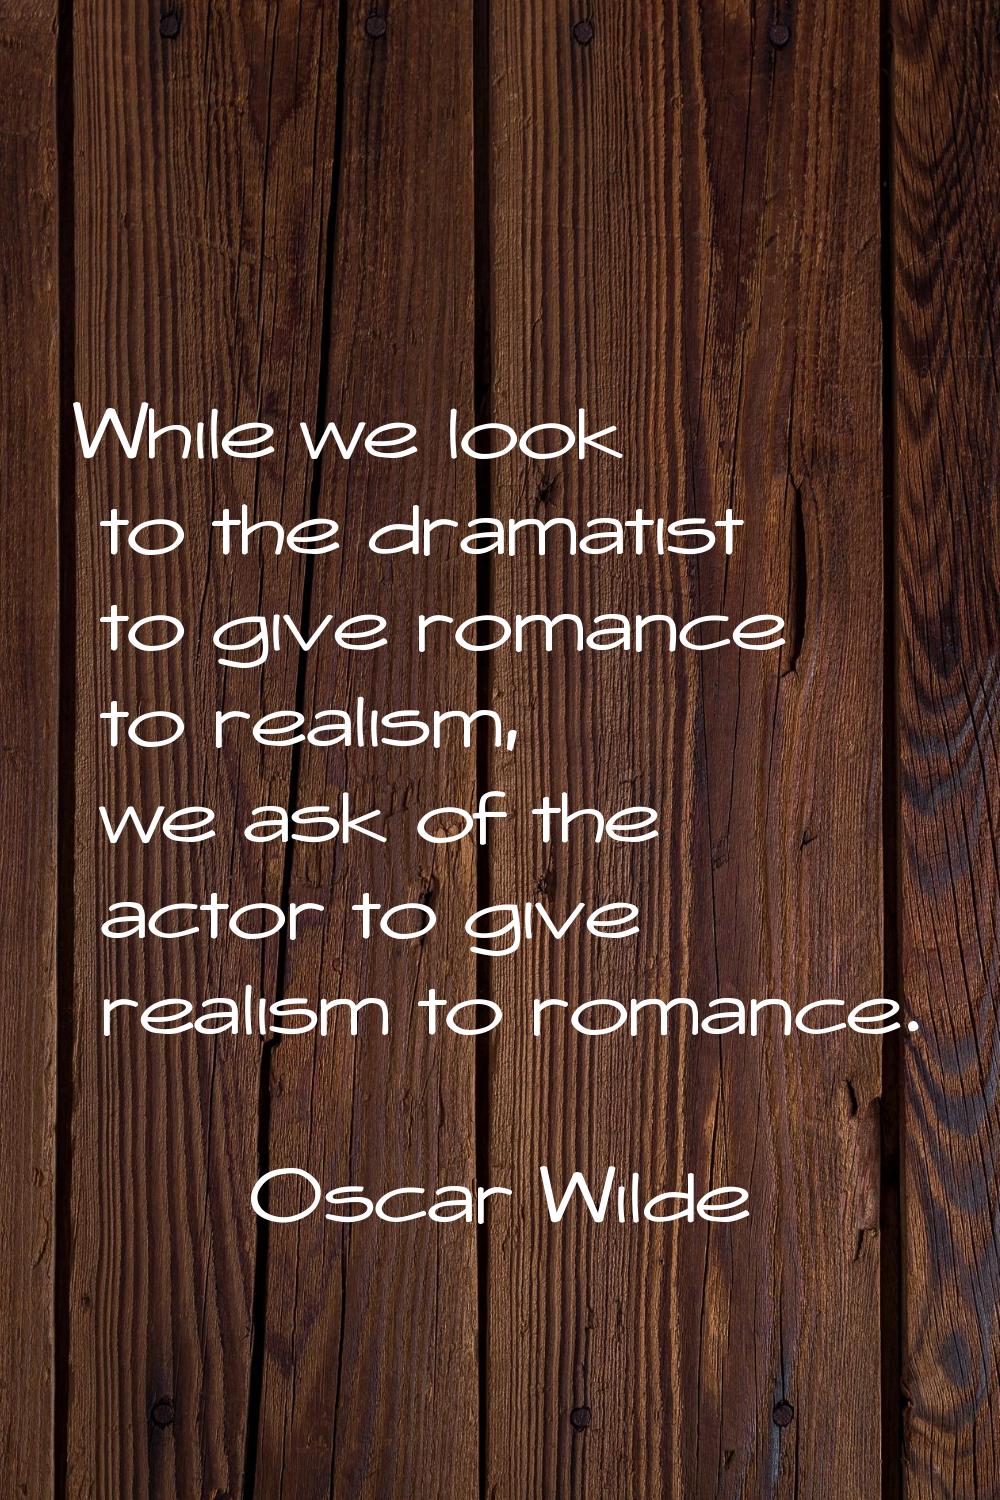 While we look to the dramatist to give romance to realism, we ask of the actor to give realism to r